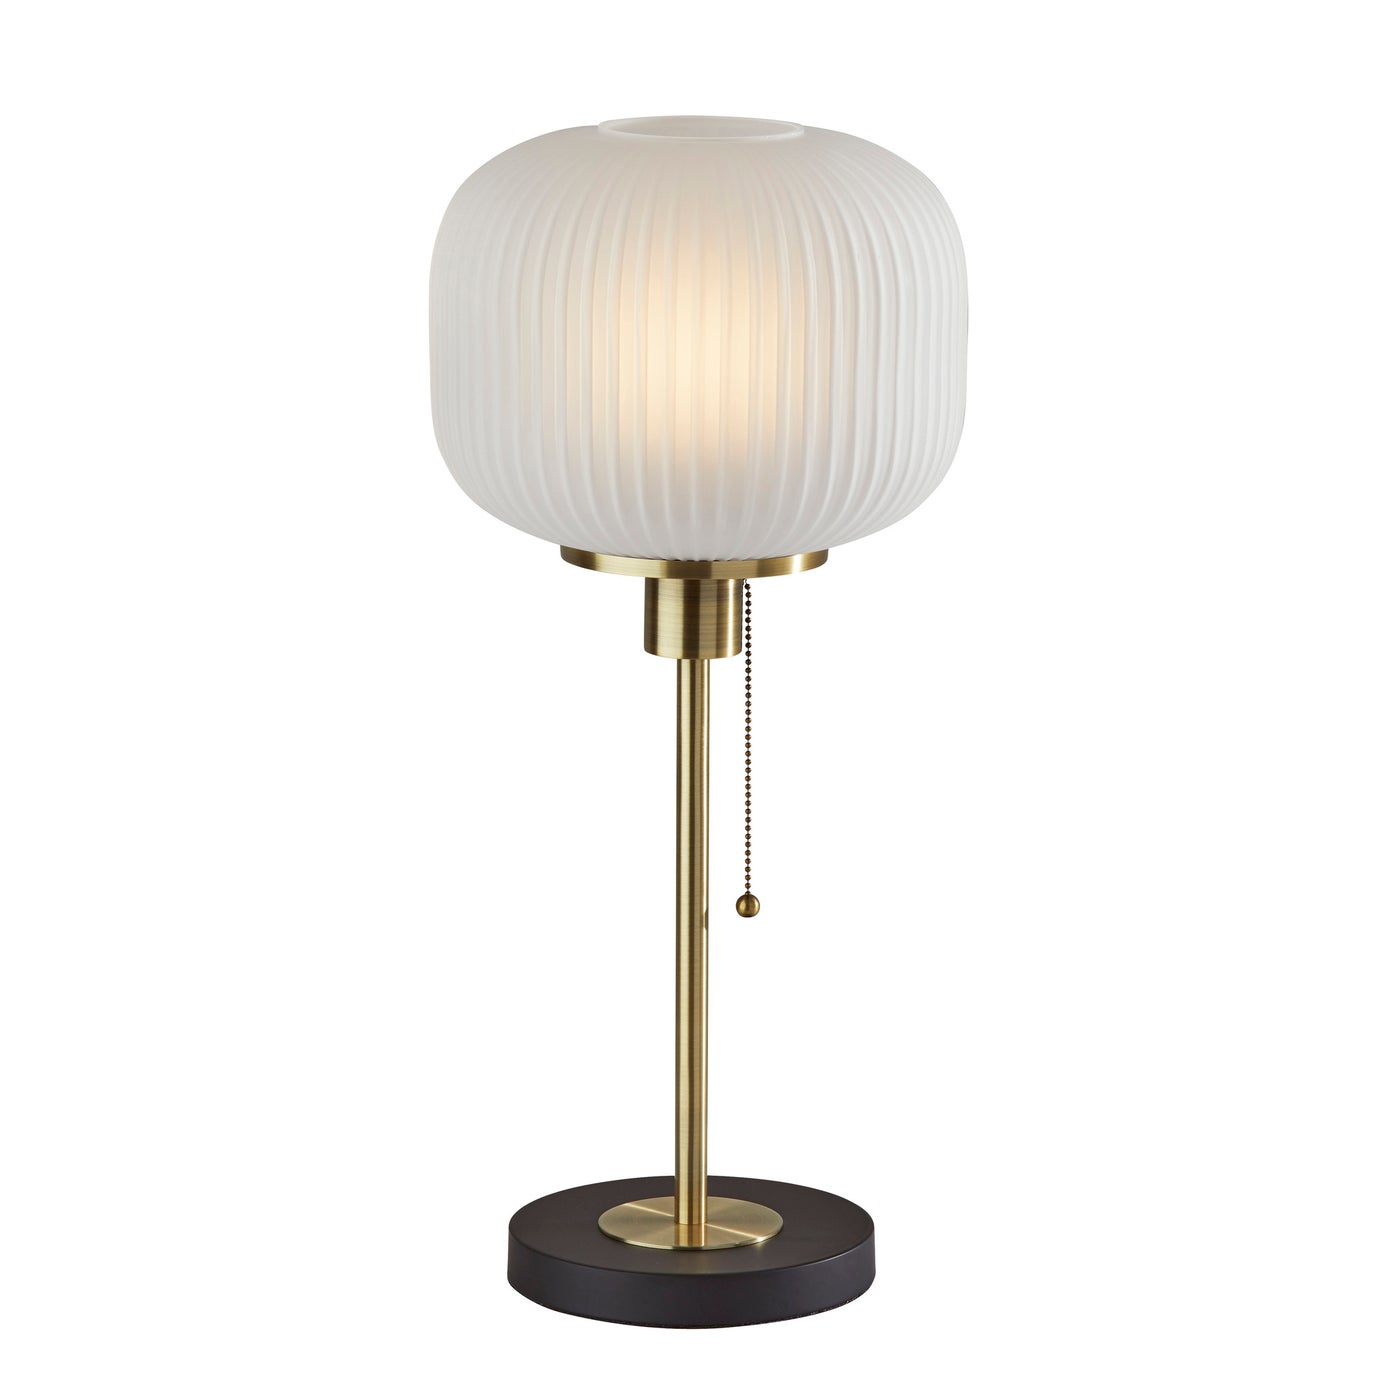 Adesso Home - 4277-21 - Table Lamp - Hazel - Antique Brass